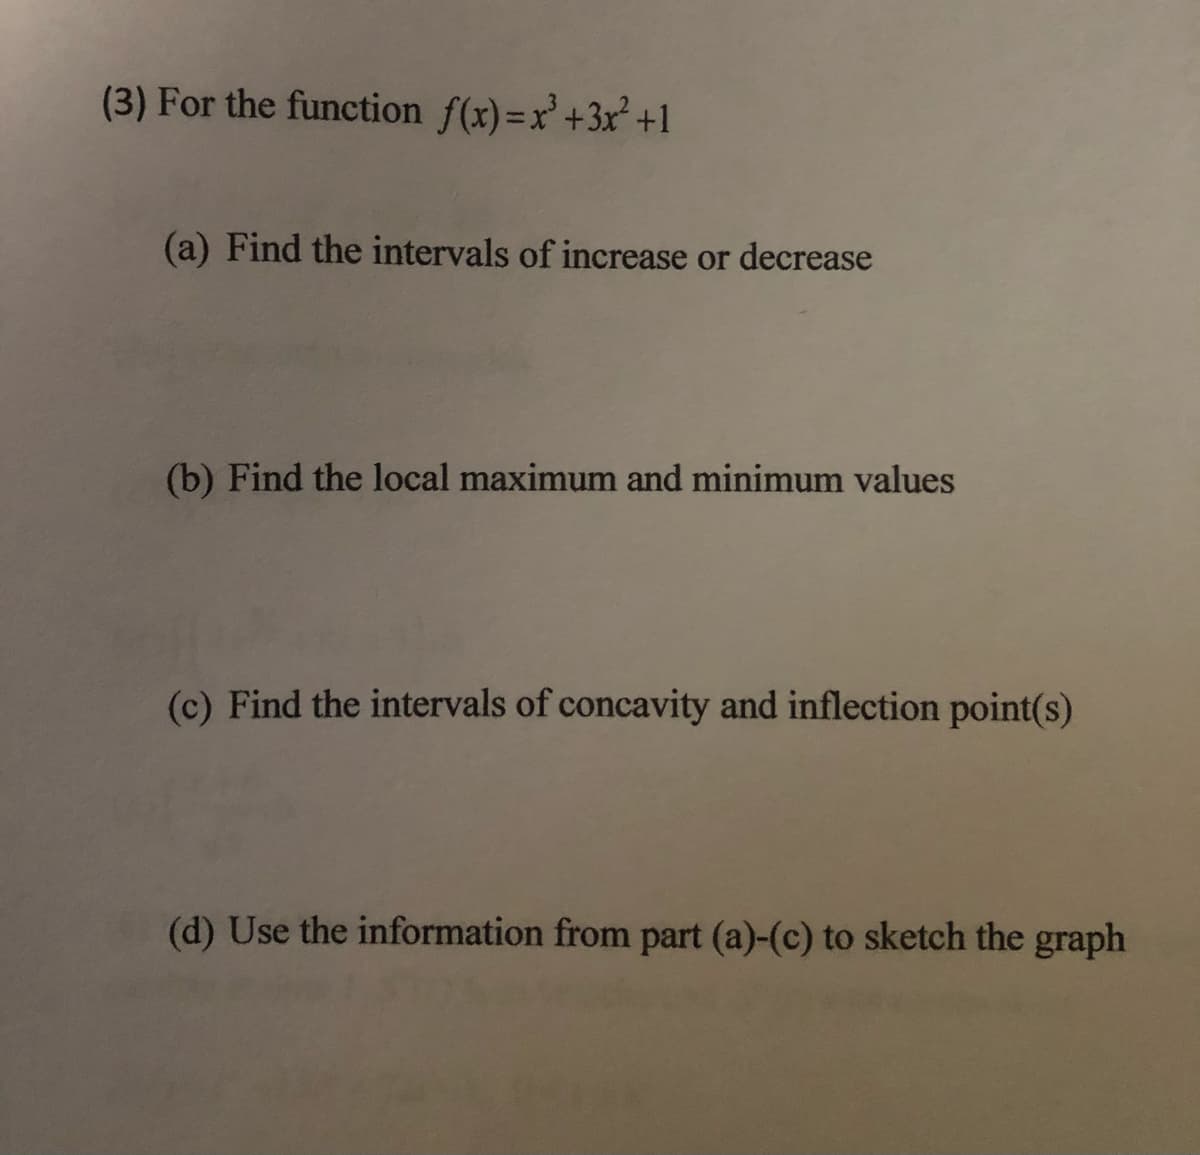 (3) For the function f(x)=x'+3x² +1
(a) Find the intervals of increase or decrease
(b) Find the local maximum and minimum values
(c) Find the intervals of concavity and inflection point(s)
(d) Use the information from part (a)-(c) to sketch the graph
